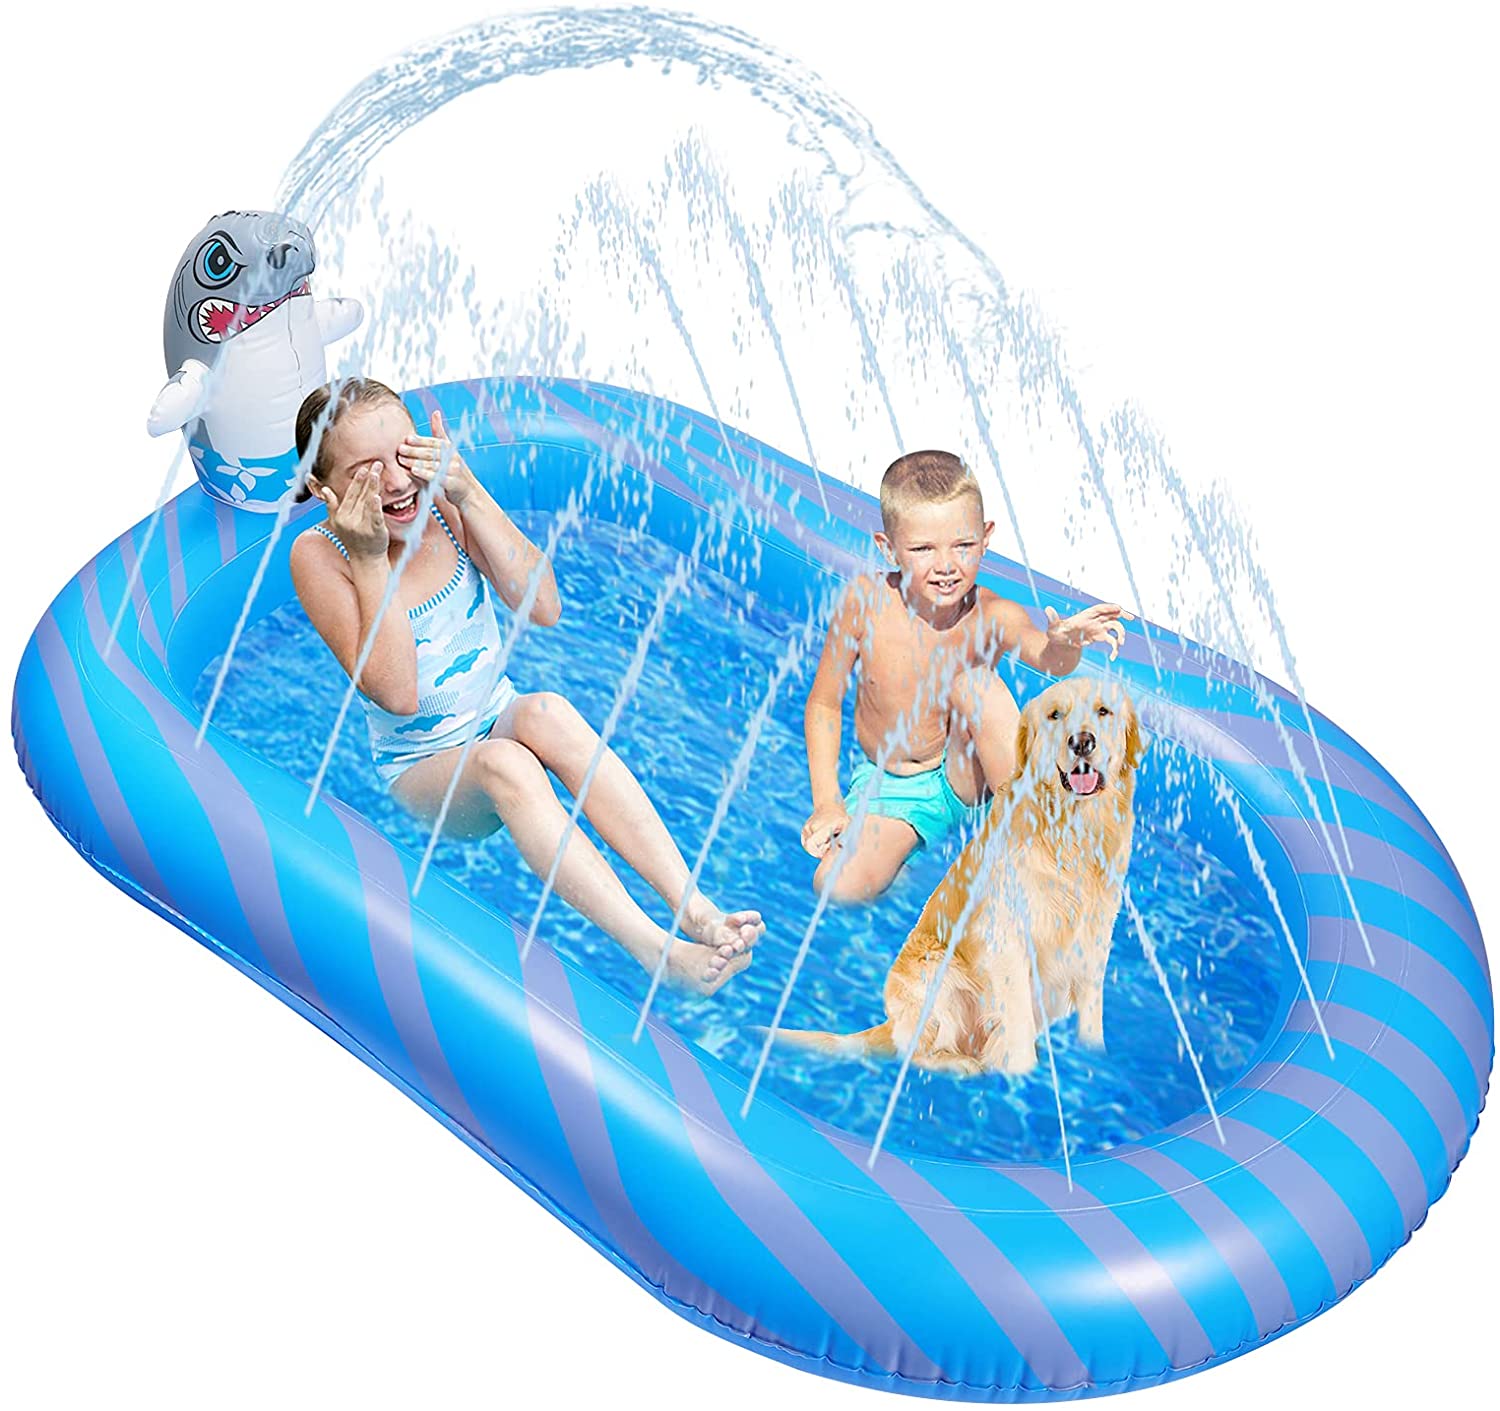 Inflatable Sprinkler Pool Water Splash Toy $7.5 (70% off) shipped